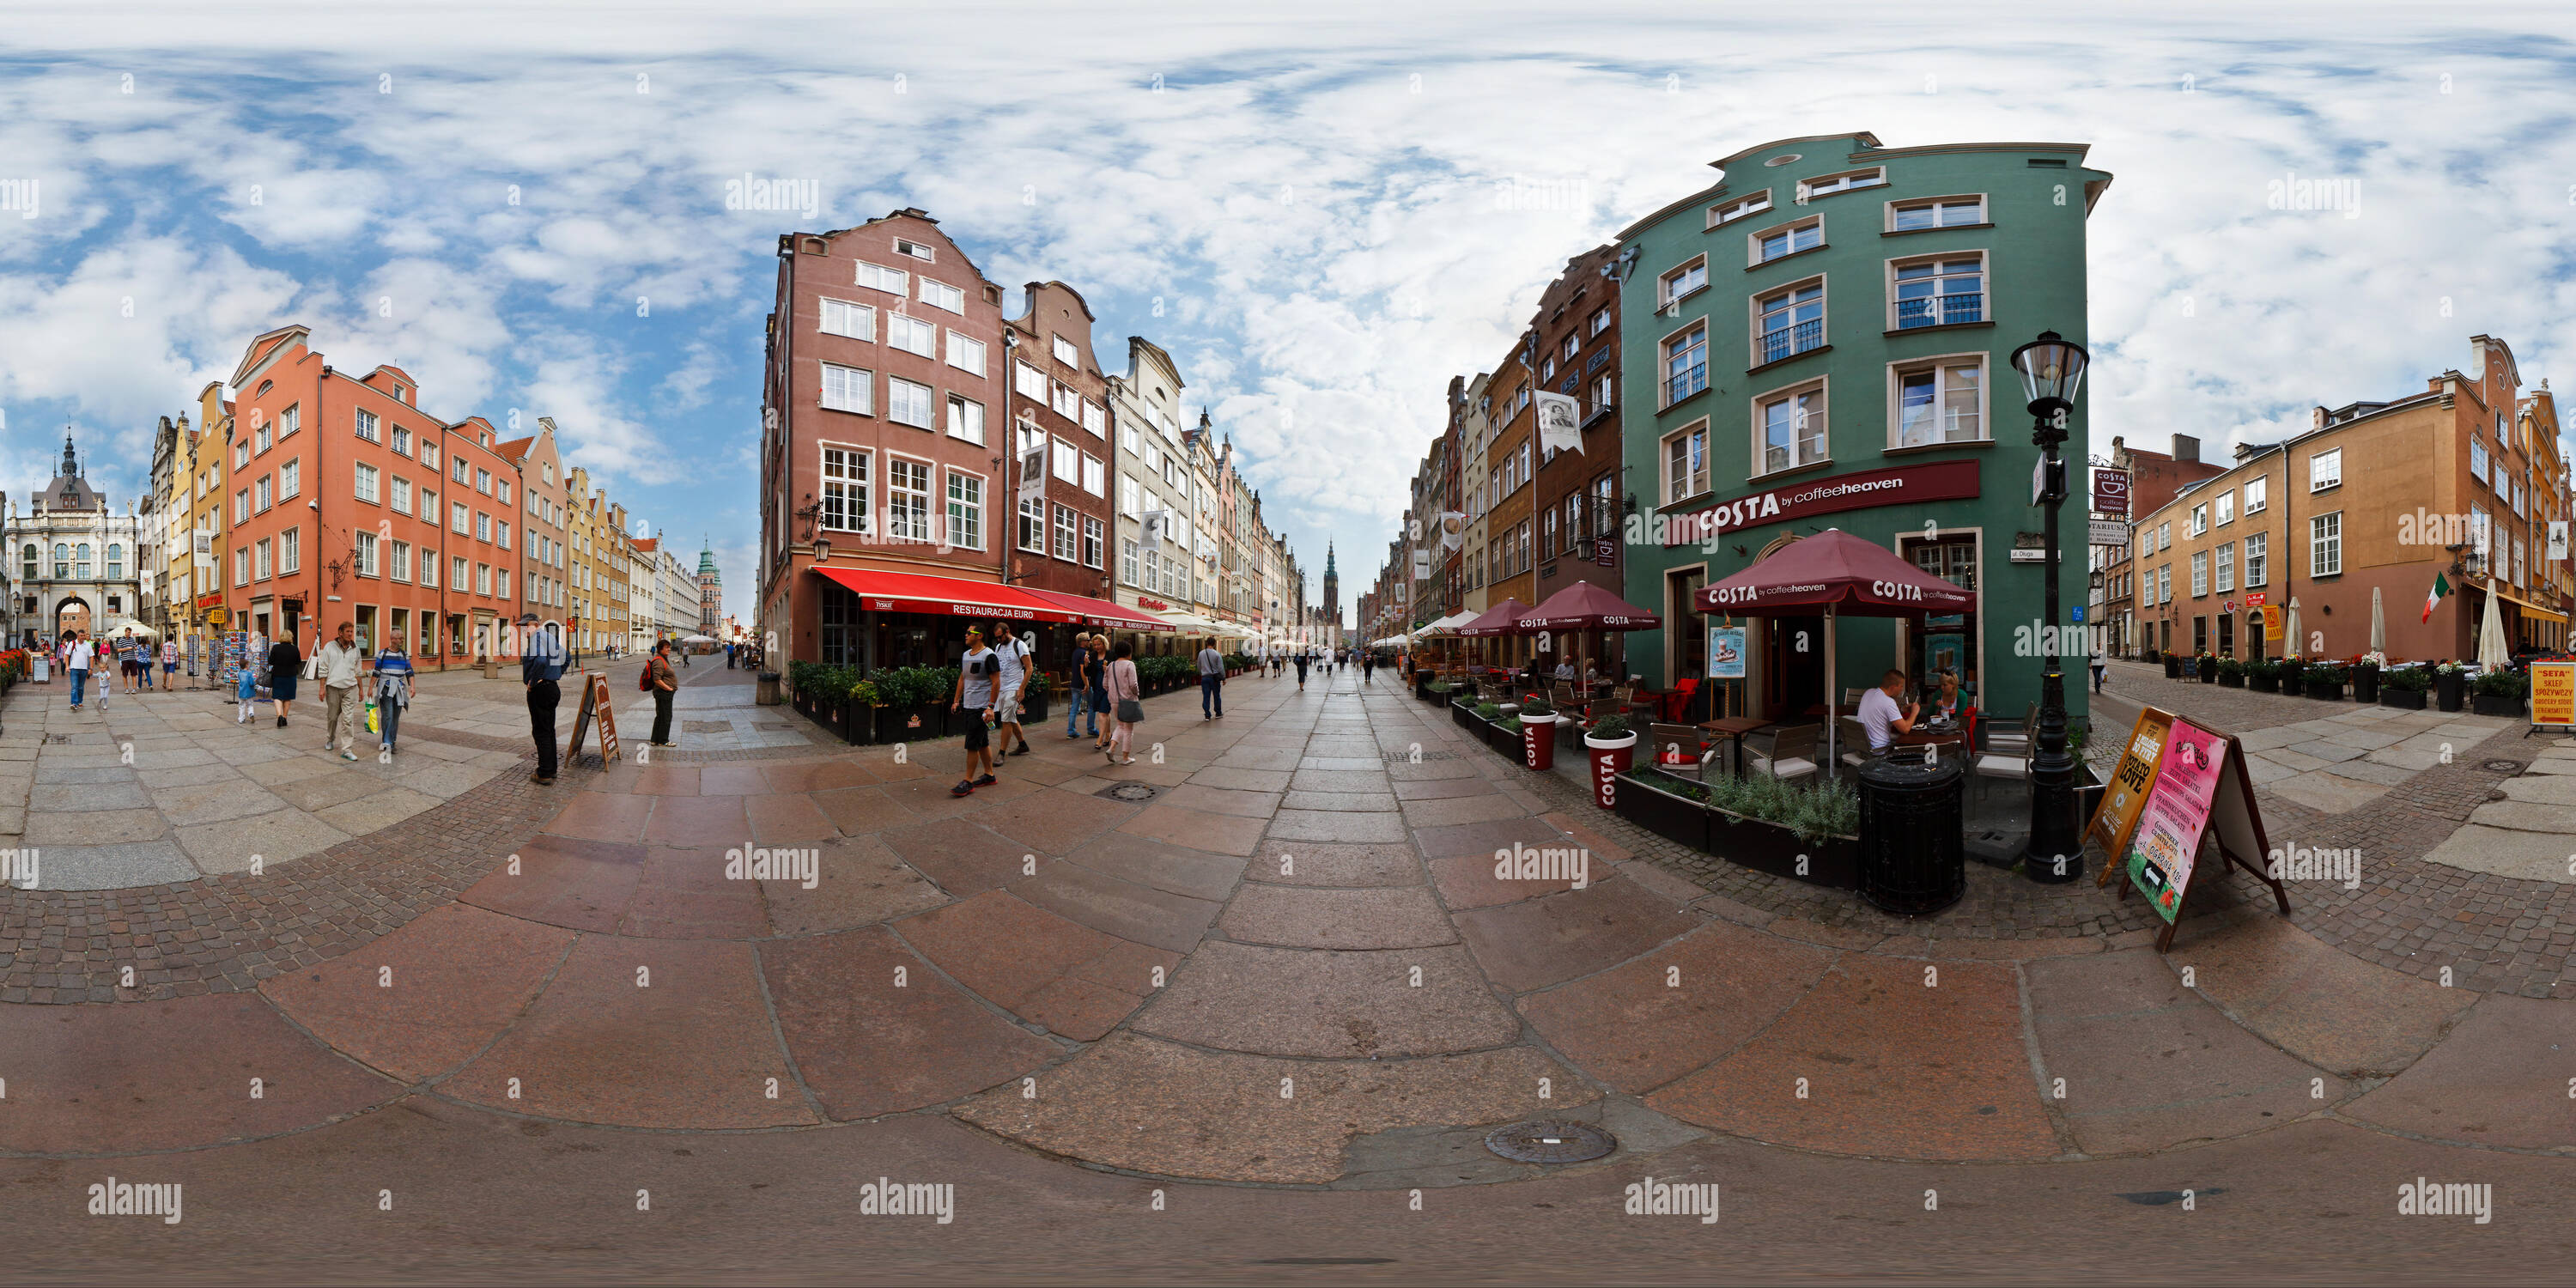 360 degree panoramic view of 360 degree virtual trip around the old town in Gdansk. Poland.